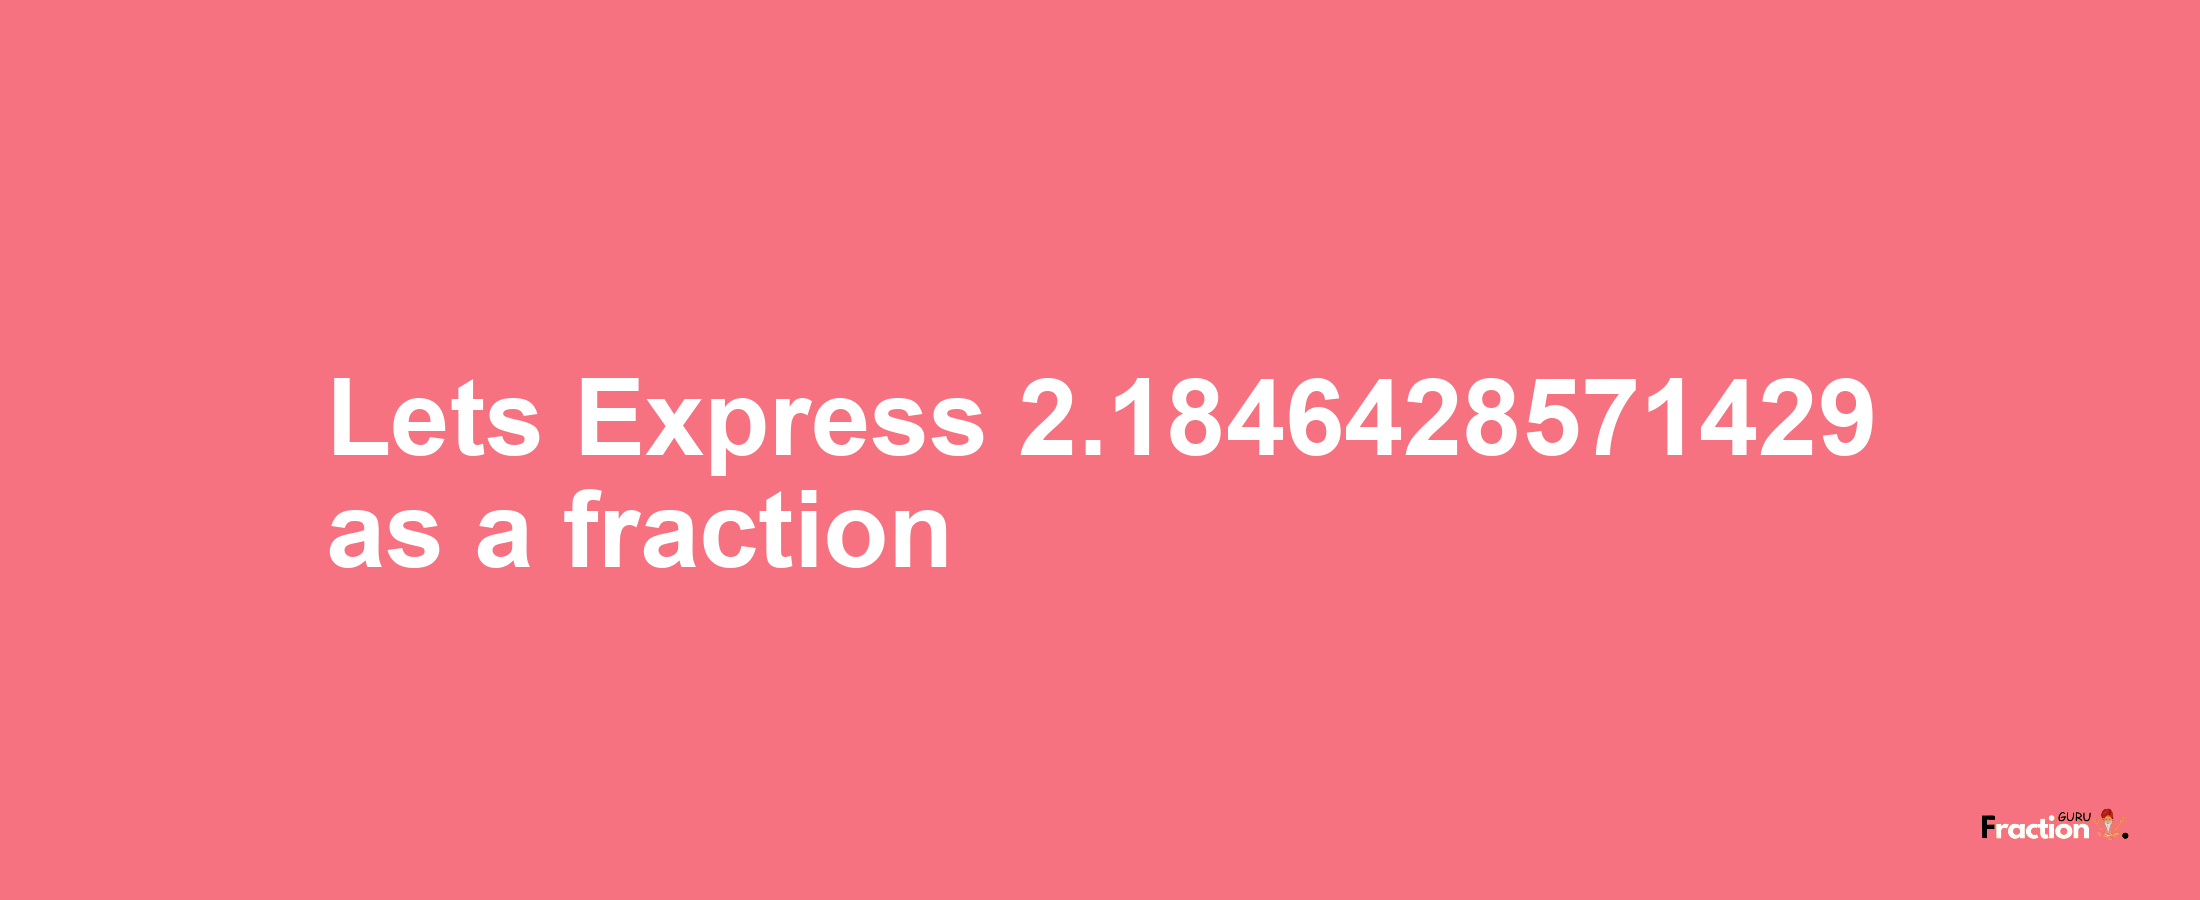 Lets Express 2.1846428571429 as afraction